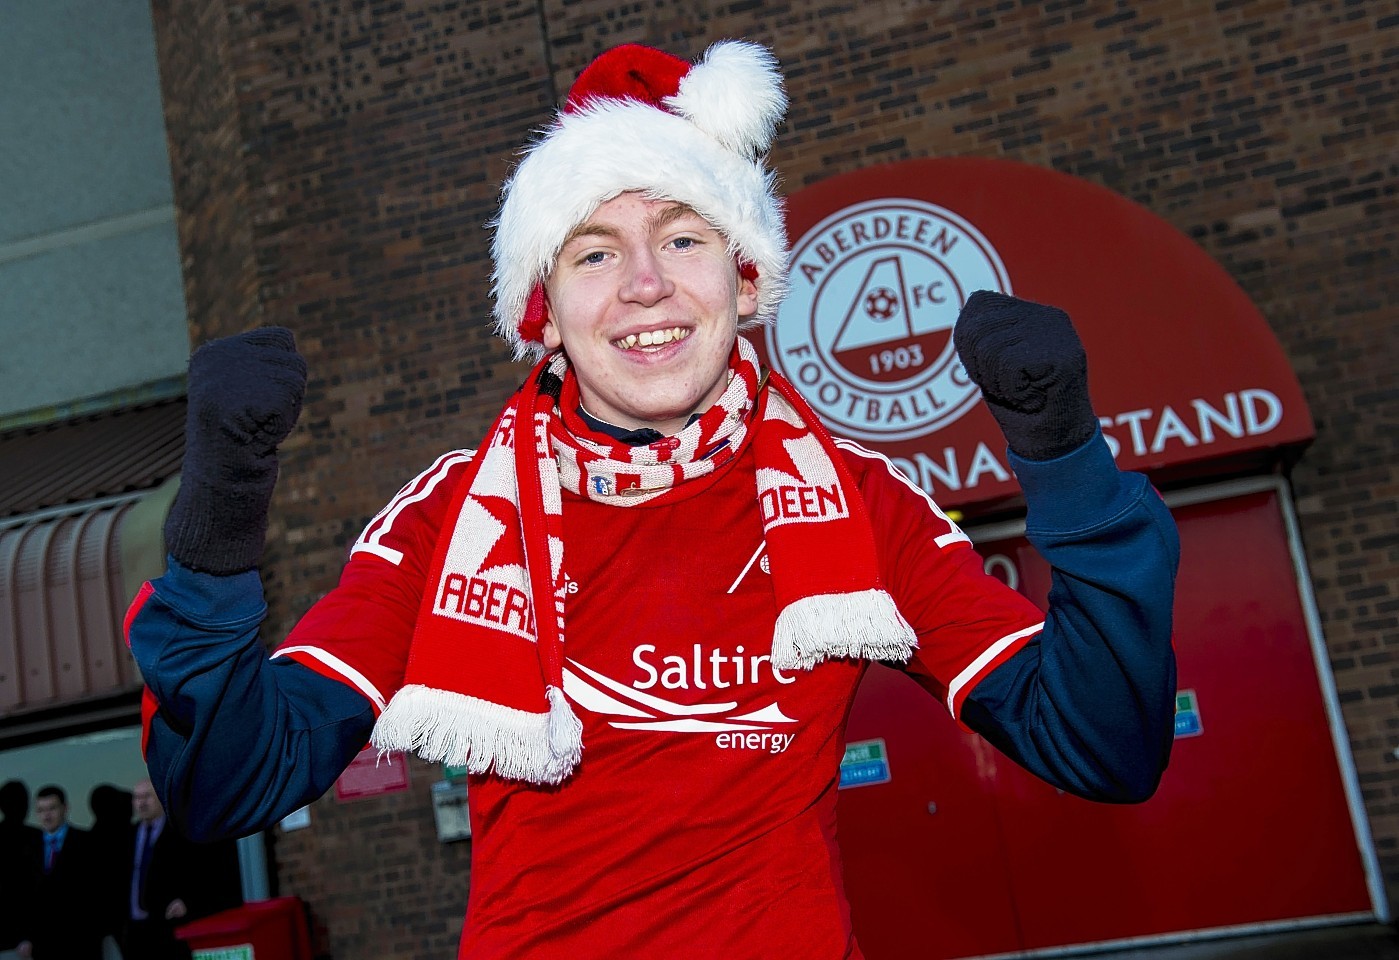 Aberdeen fans getting into the Christmas spirit!